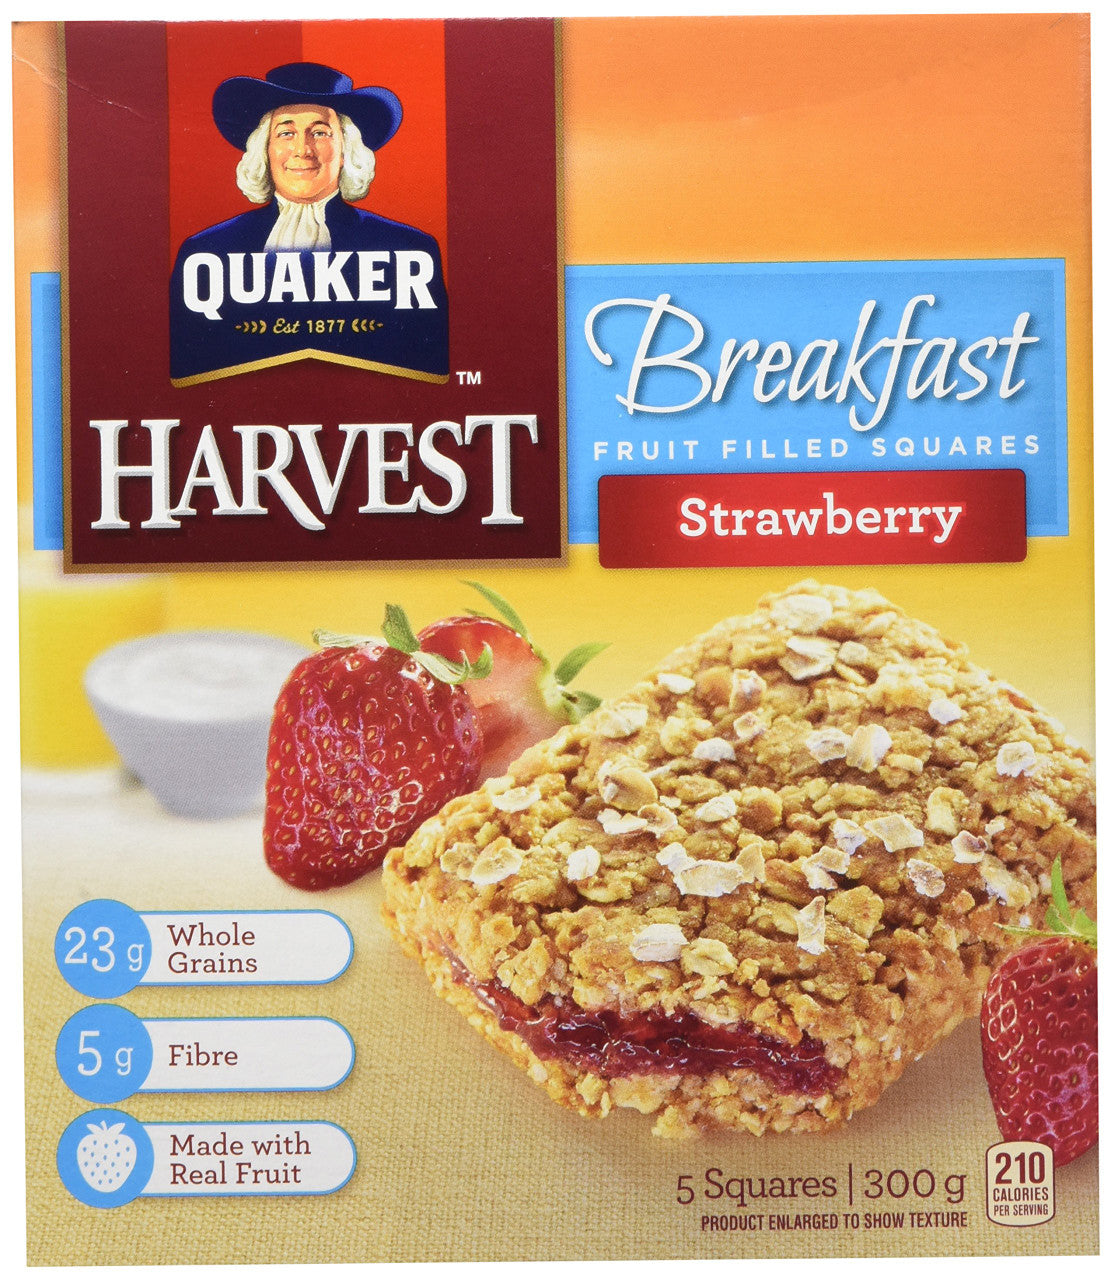 Quaker Harvest Breakfast Strawberry Fruit Filled Squares 300g/10.6oz (Imported from Canada)